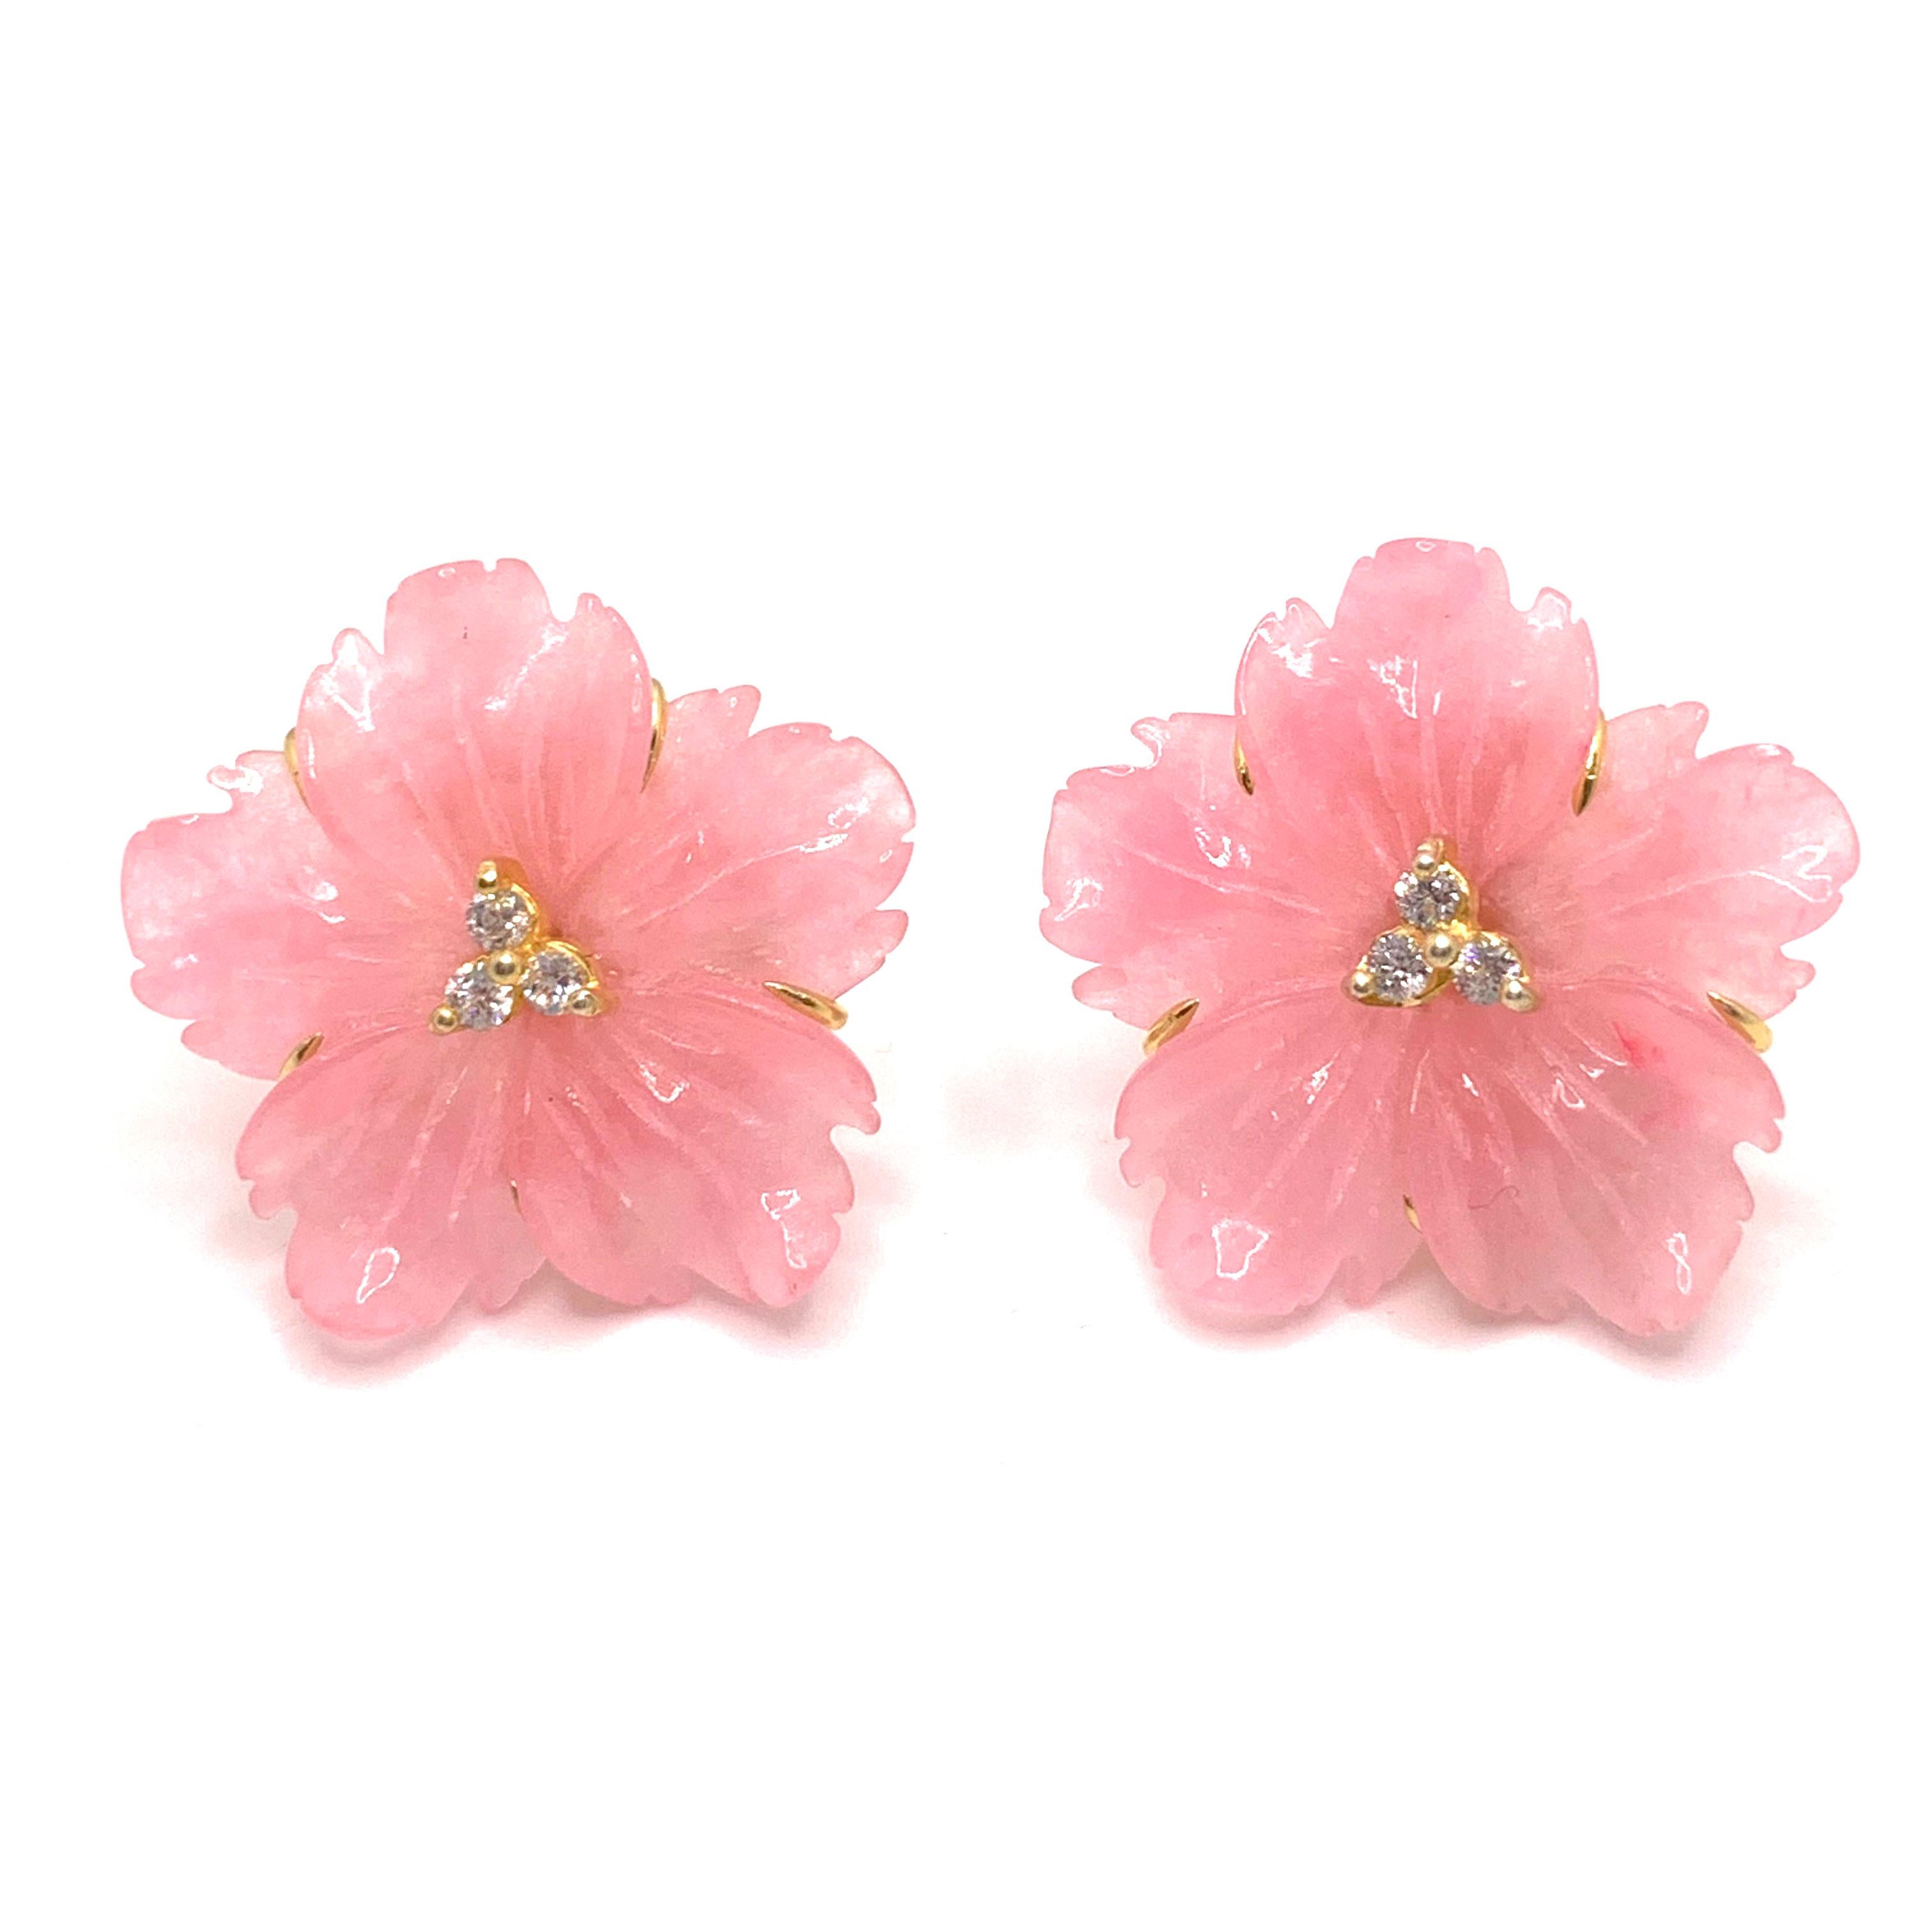 Elegant 24mm Carved Pink Quartzite Flower Vermeil Earrings

This gorgeous pair of earrings features 24mm pink quartzite carved into beautiful three dimension flower, adorned with round simulated diamonds in the center, handset in 18k yellow gold